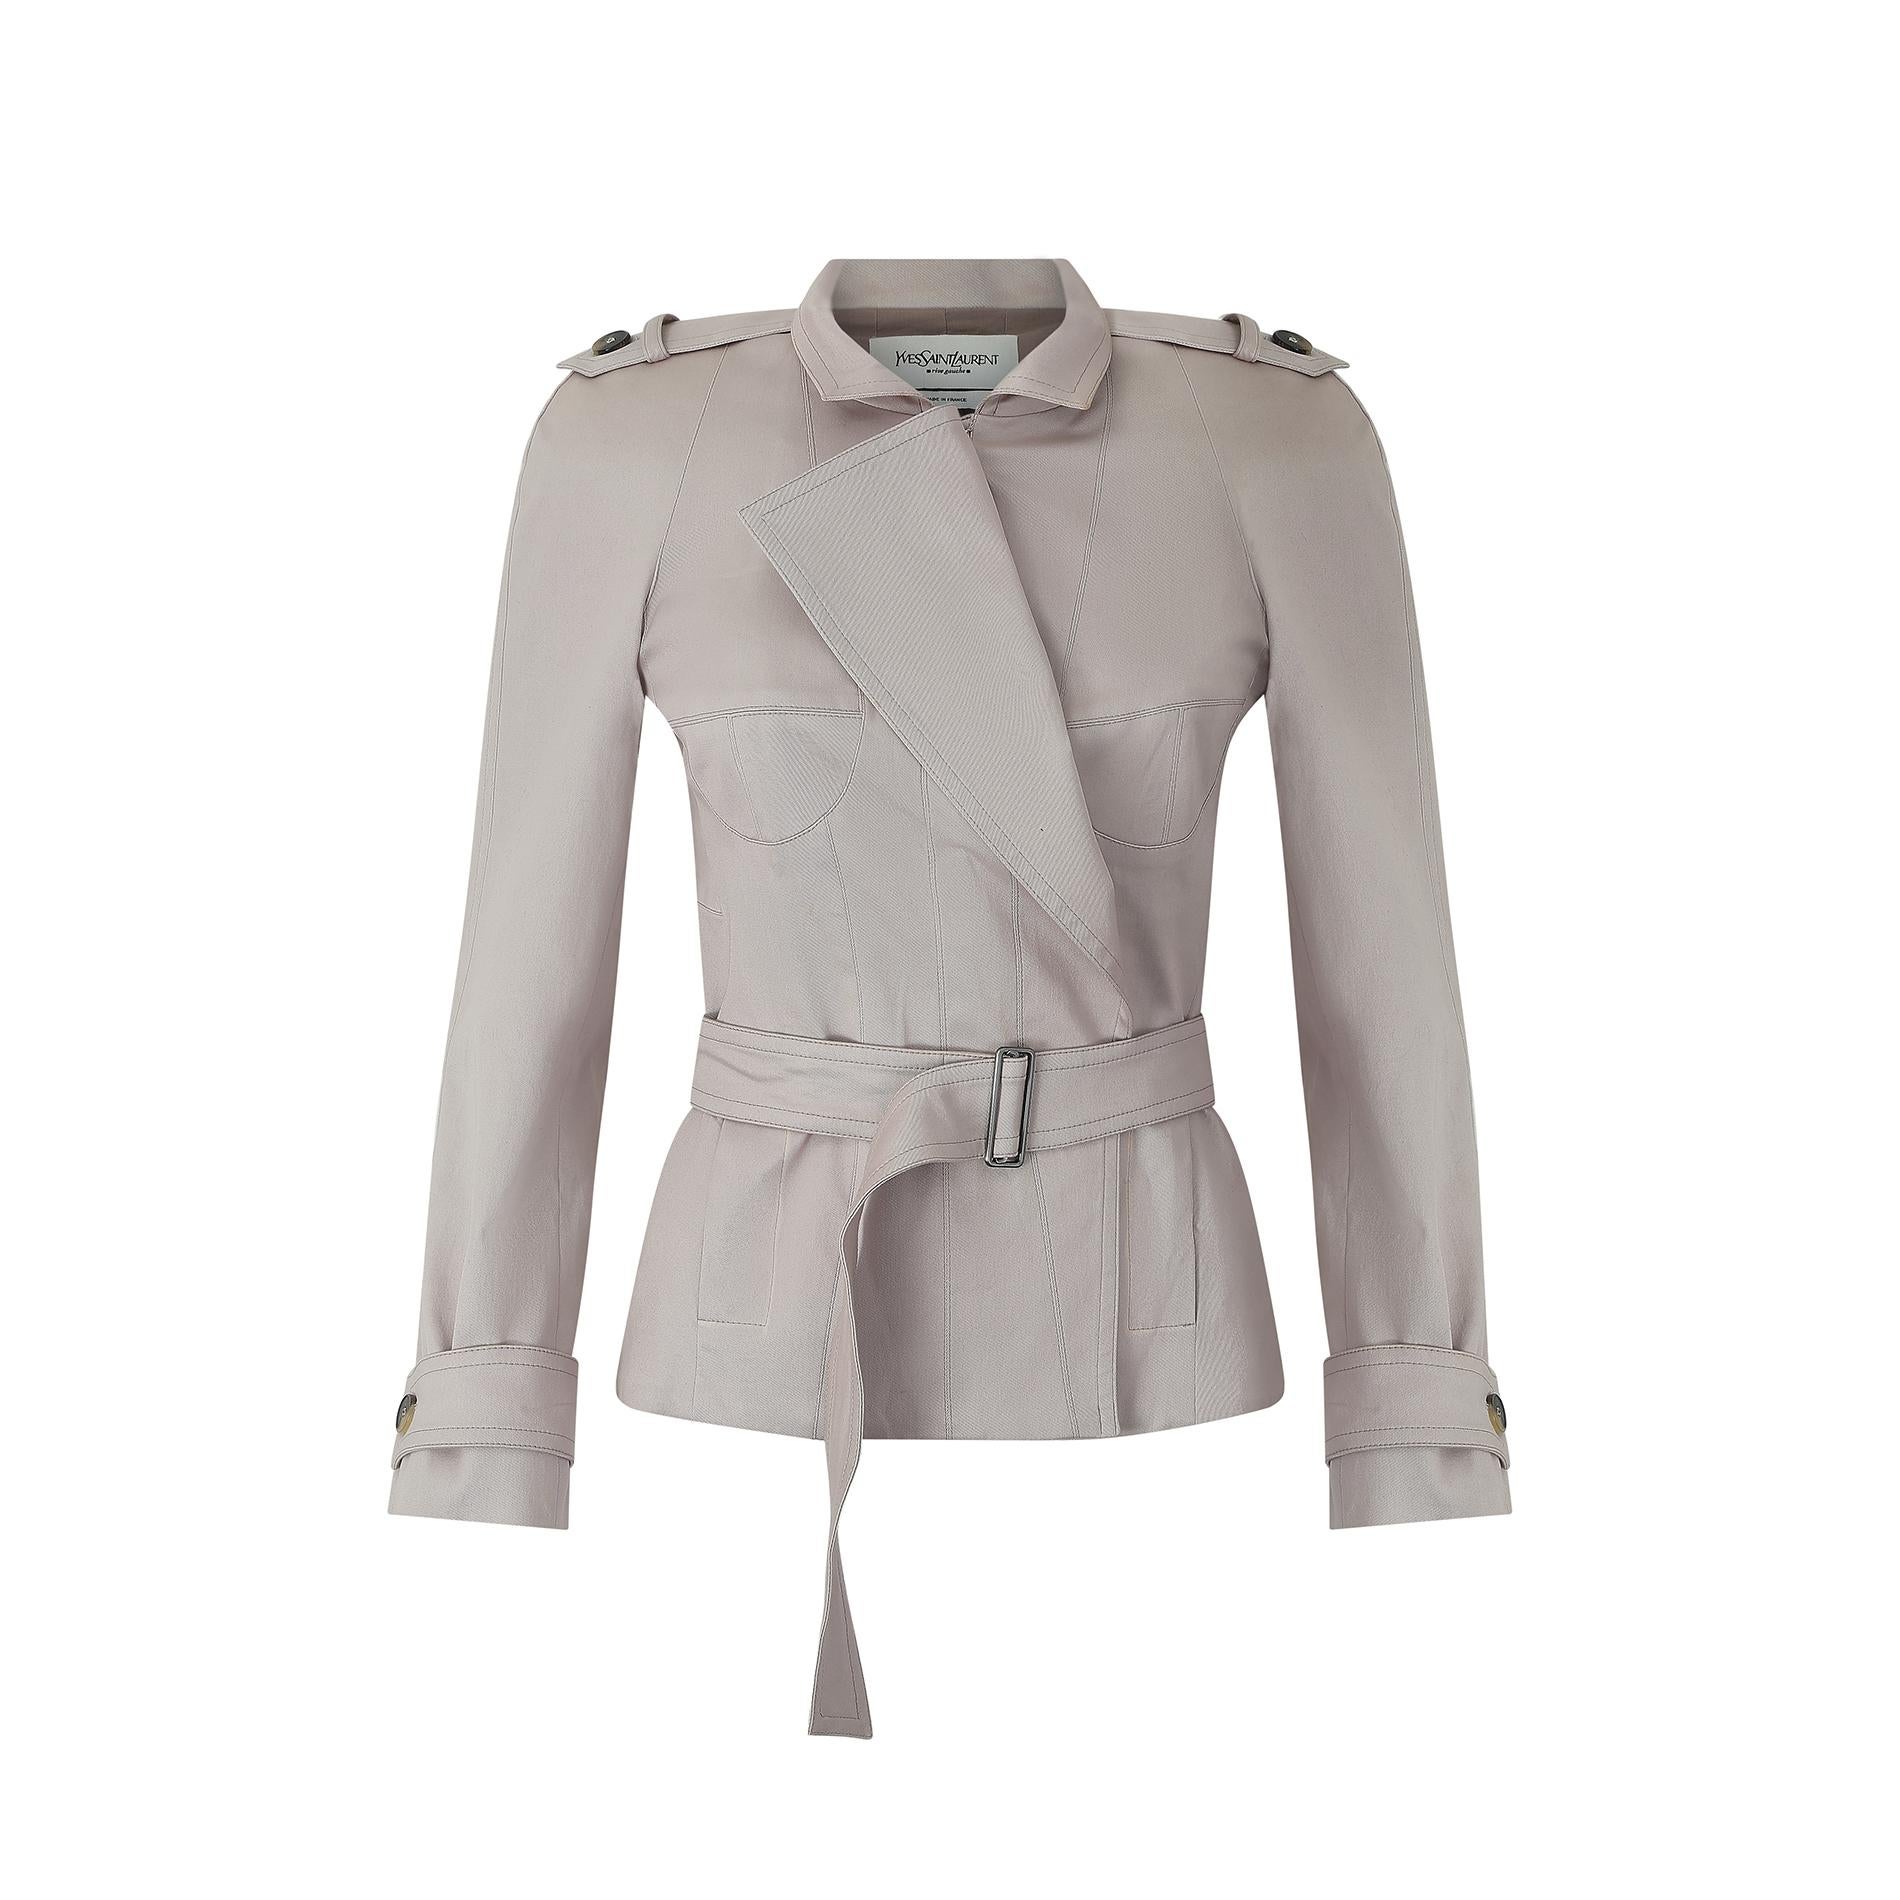 This spring / summer 2003 collection belted trench style jacket was designed by Tom Ford for Yves Saint Laurent during his tenure as creative director between 1999 and 2004. It is crafted from a thick, high-quality oyster pink coloured cotton blend,